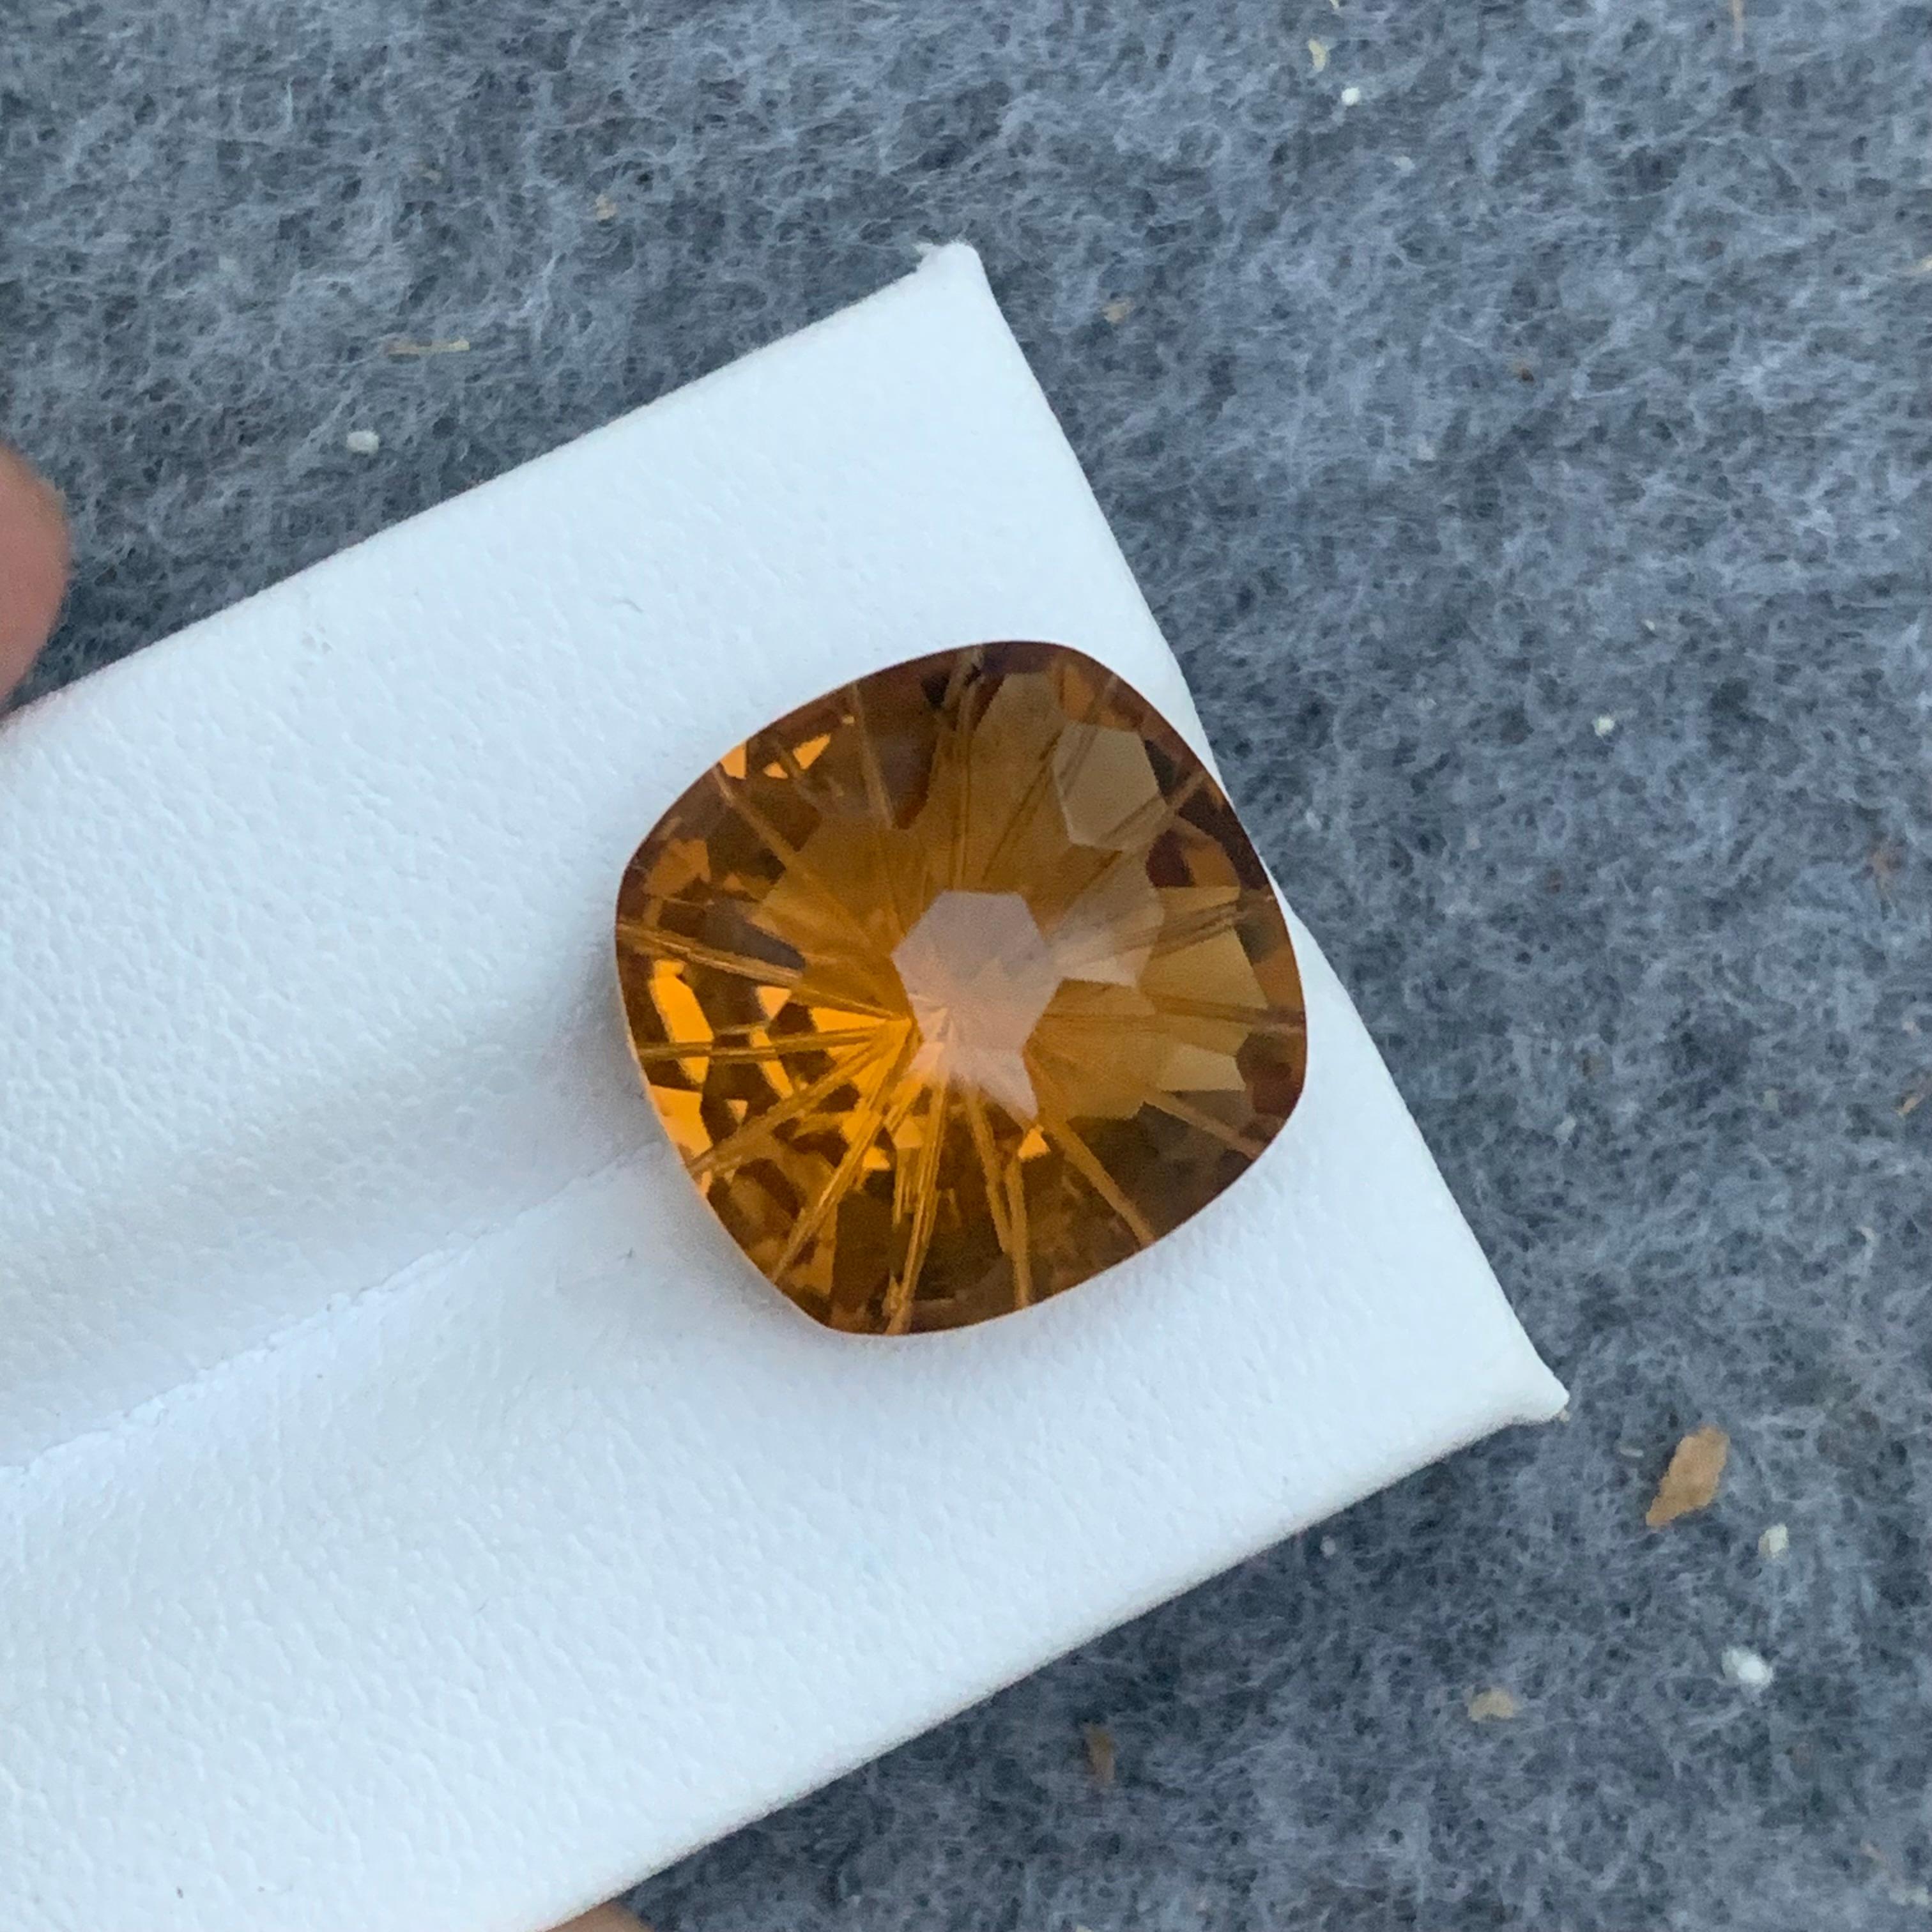 Faceted Honey Citrine
Weight : 14.75 Carats
Dimensions : 16.4x16x10 Mm
Clarity : Eye Clean 
Origin : Brazil
Color: Yellow
Shape: Cushion
Certificate: On Demand
Month: November
.
The Many Healing Properties of Citrine
Increase Optimism, And Sunny